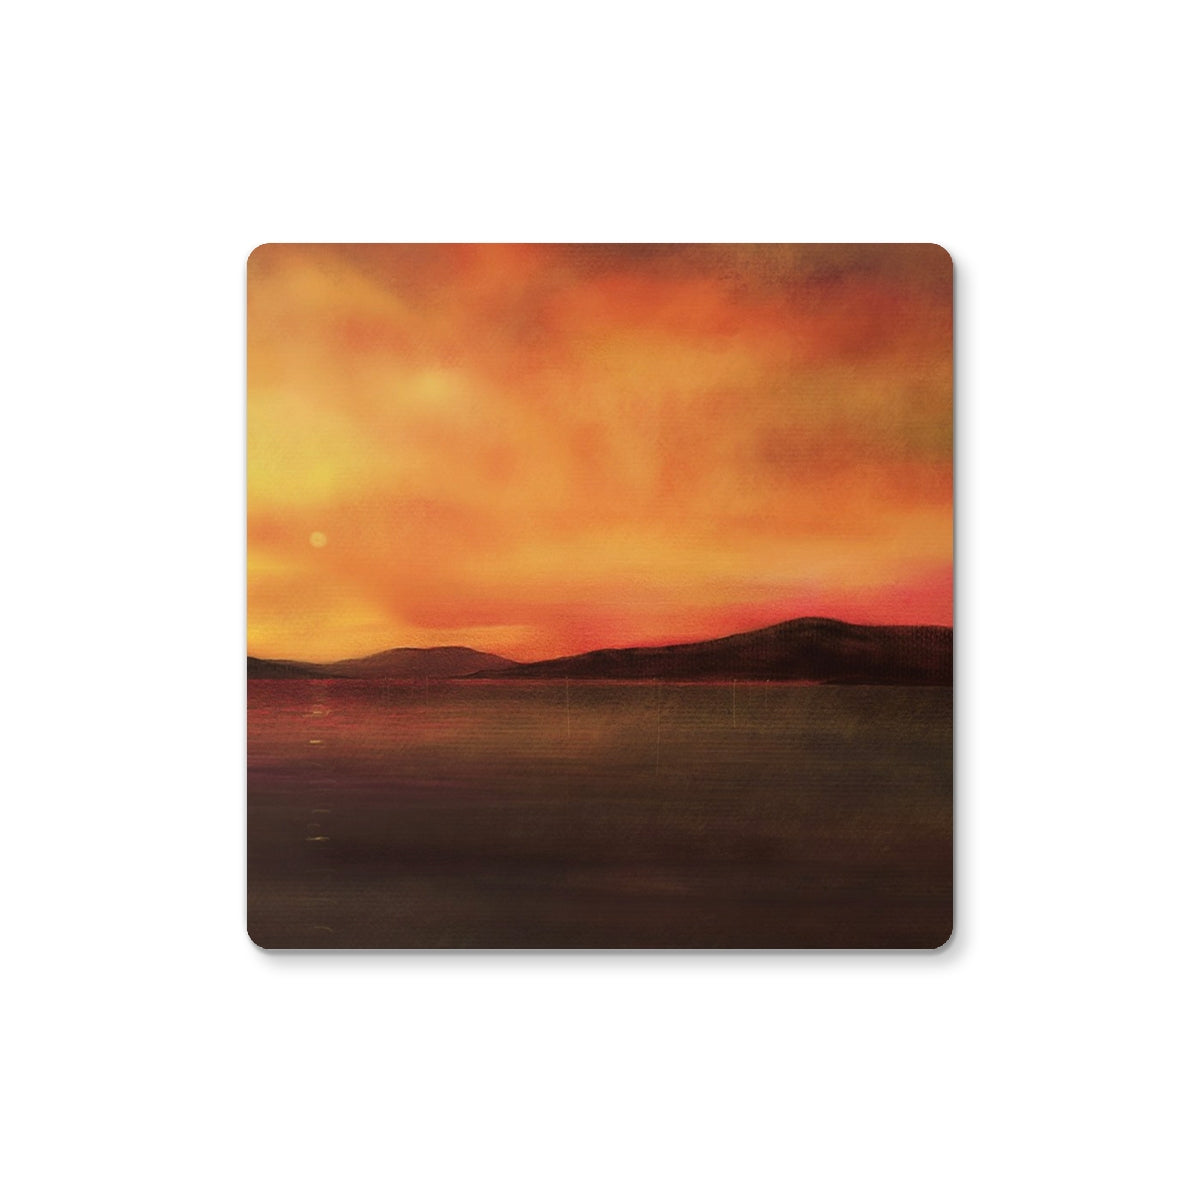 Harris Sunset Art Gifts Coaster-Coasters-Hebridean Islands Art Gallery-6 Coasters-Paintings, Prints, Homeware, Art Gifts From Scotland By Scottish Artist Kevin Hunter